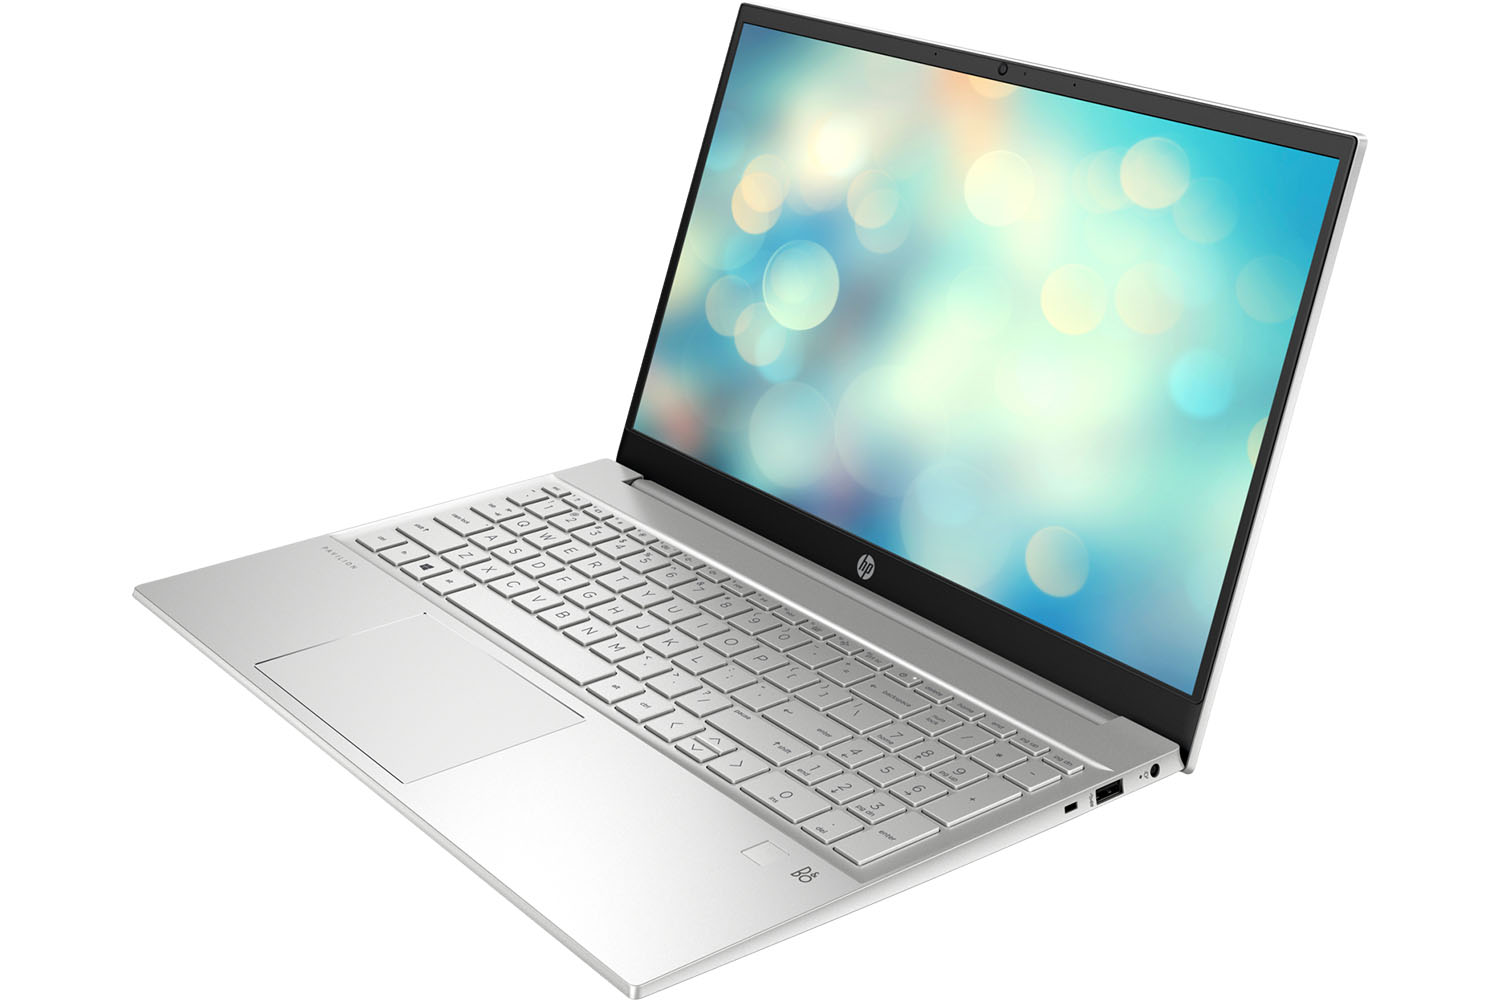 The HP Pavilion 15-inch laptop on a white background.